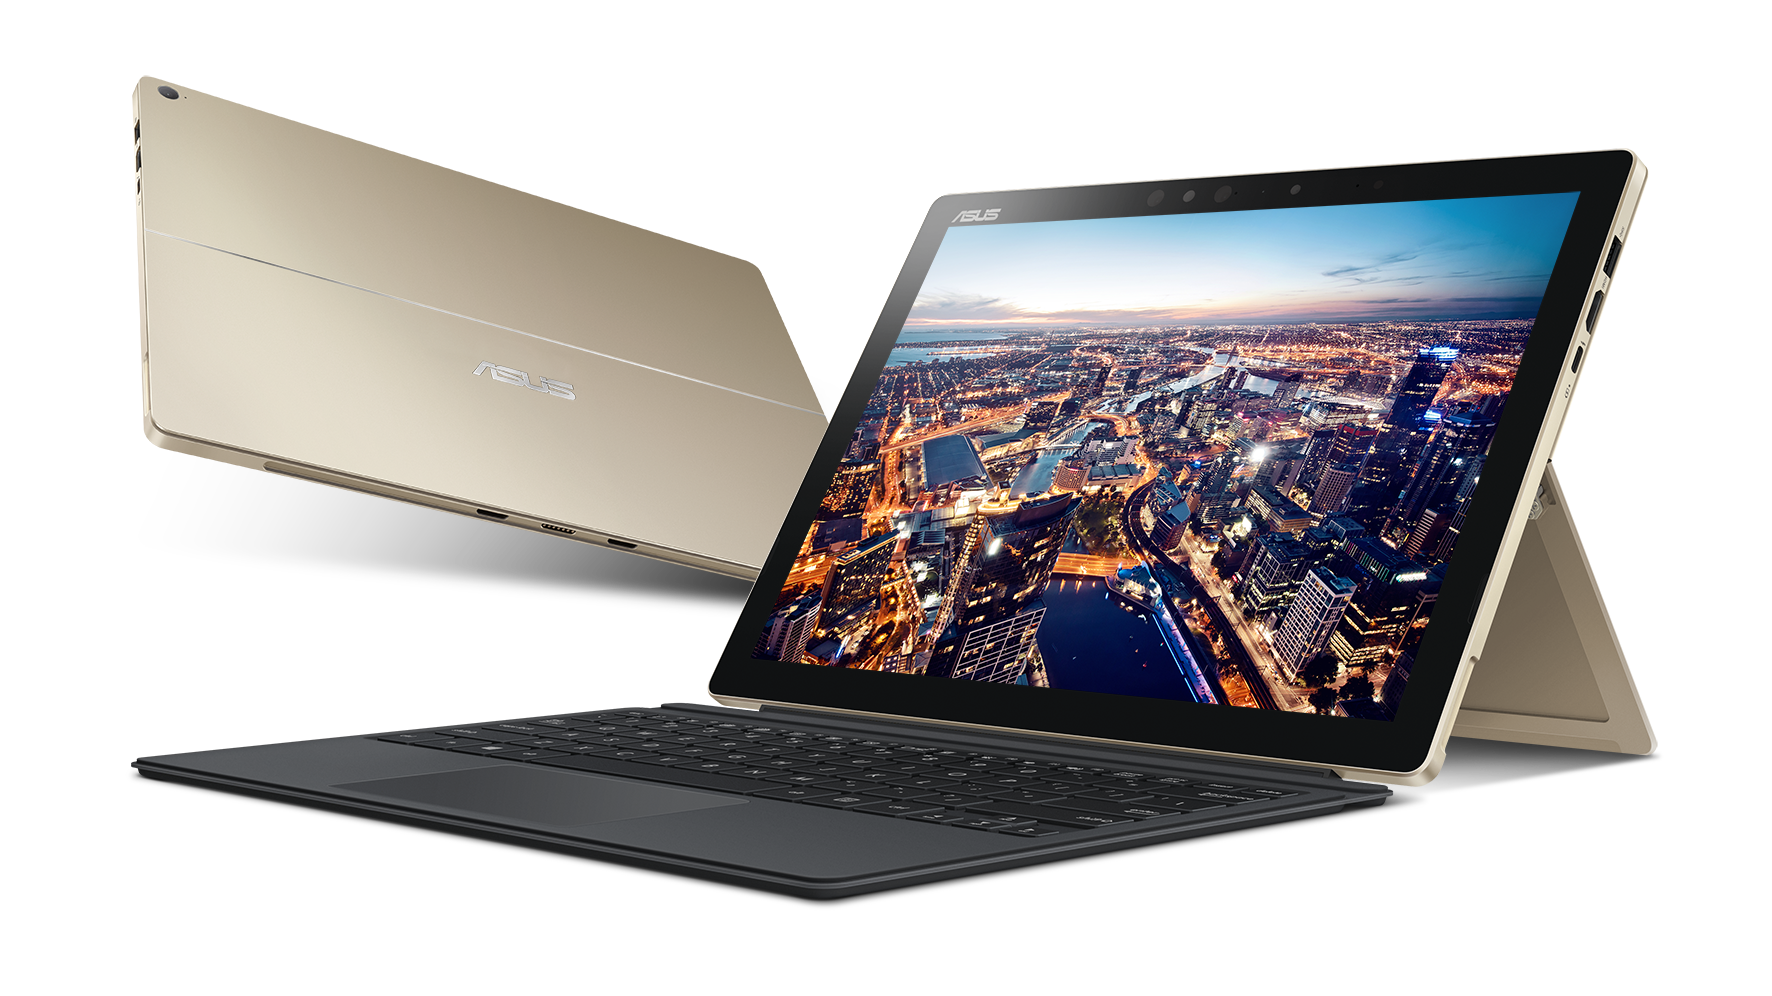 Asus Just Announced The ZenBook 3 And An Adorable Home Robot